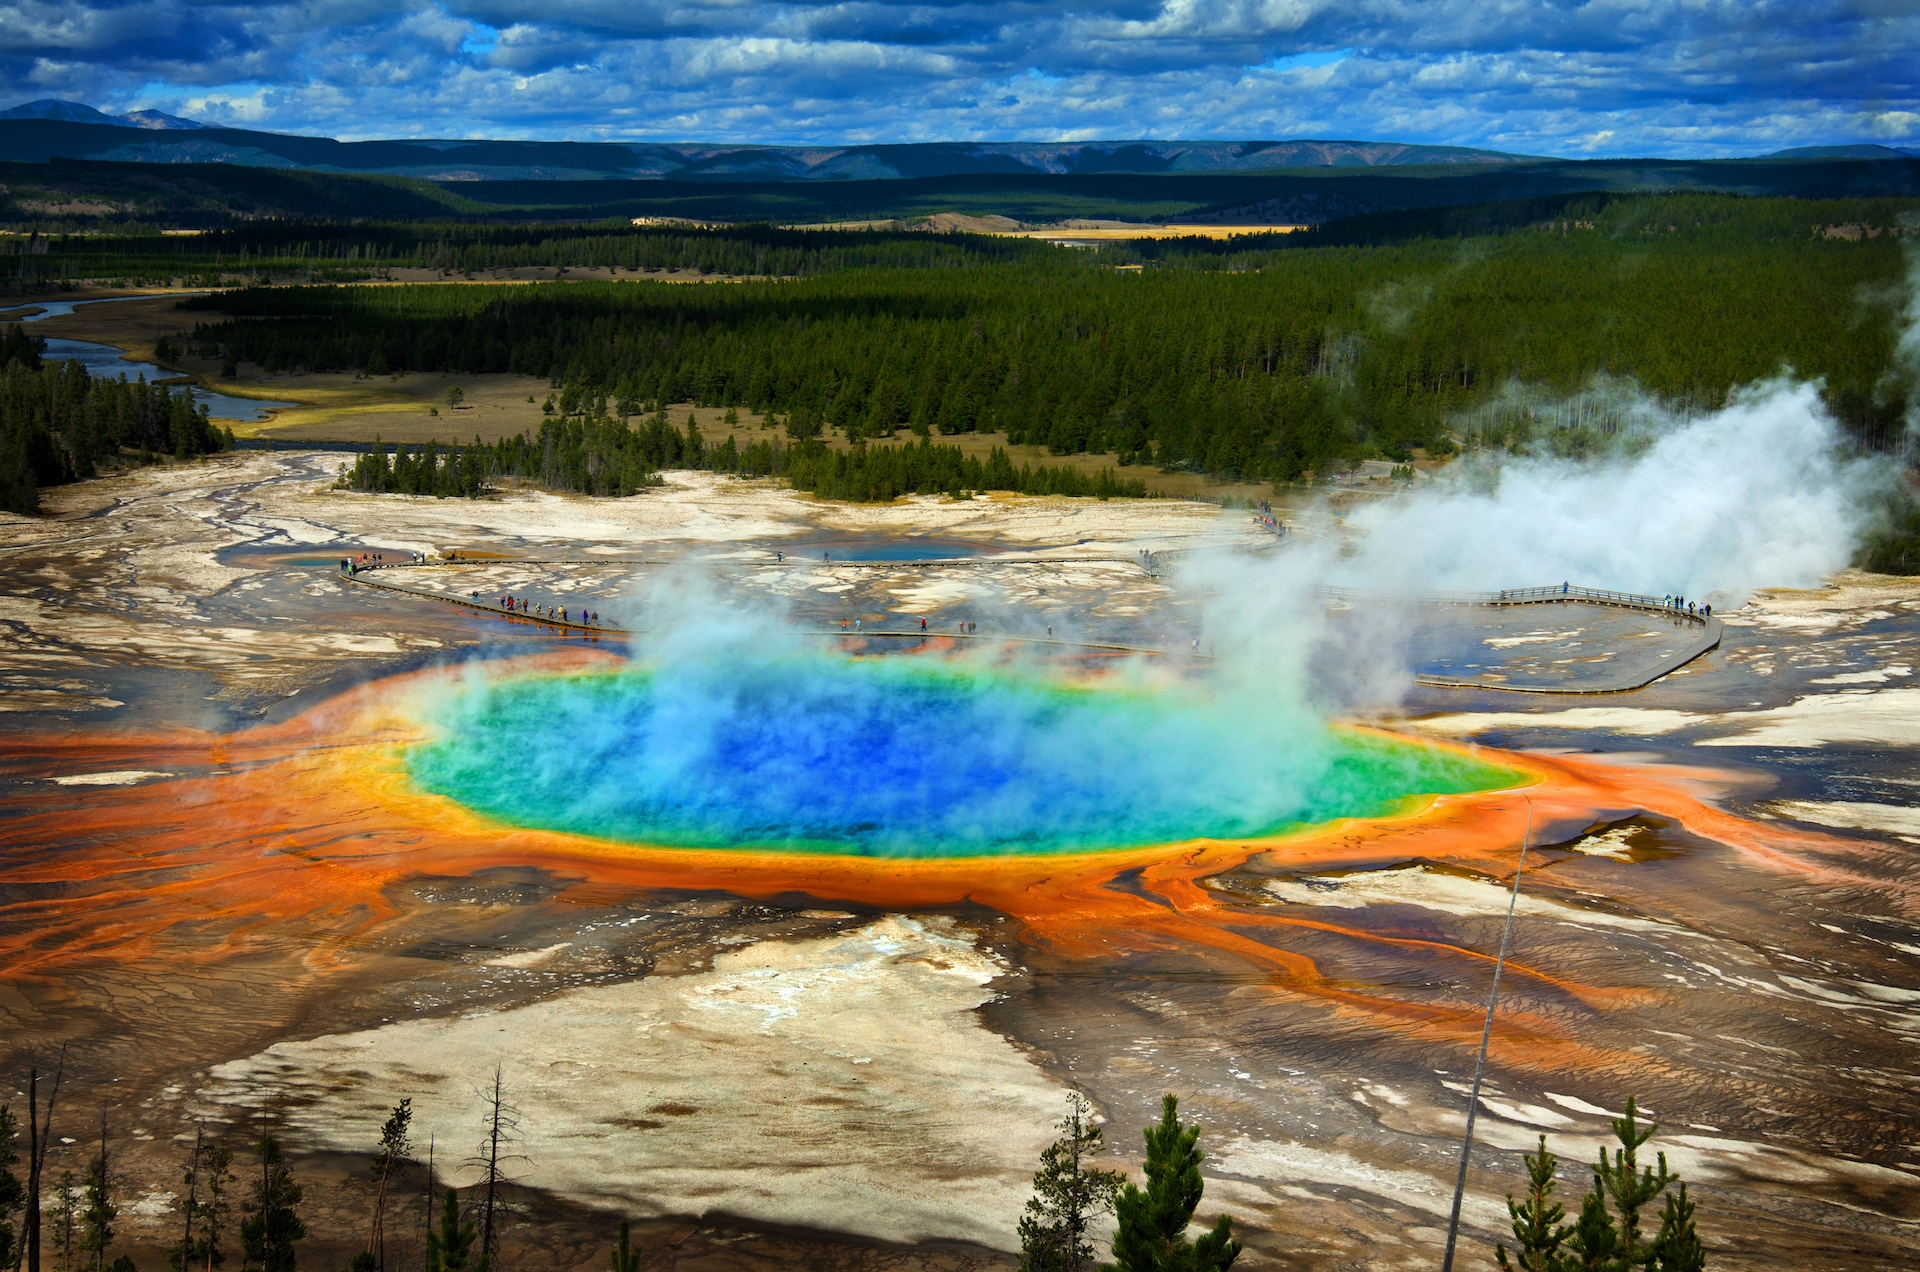 A picture of a geyser at yellowstone national park for the Manzanilla Sophia Chamomile Eye Drops blog